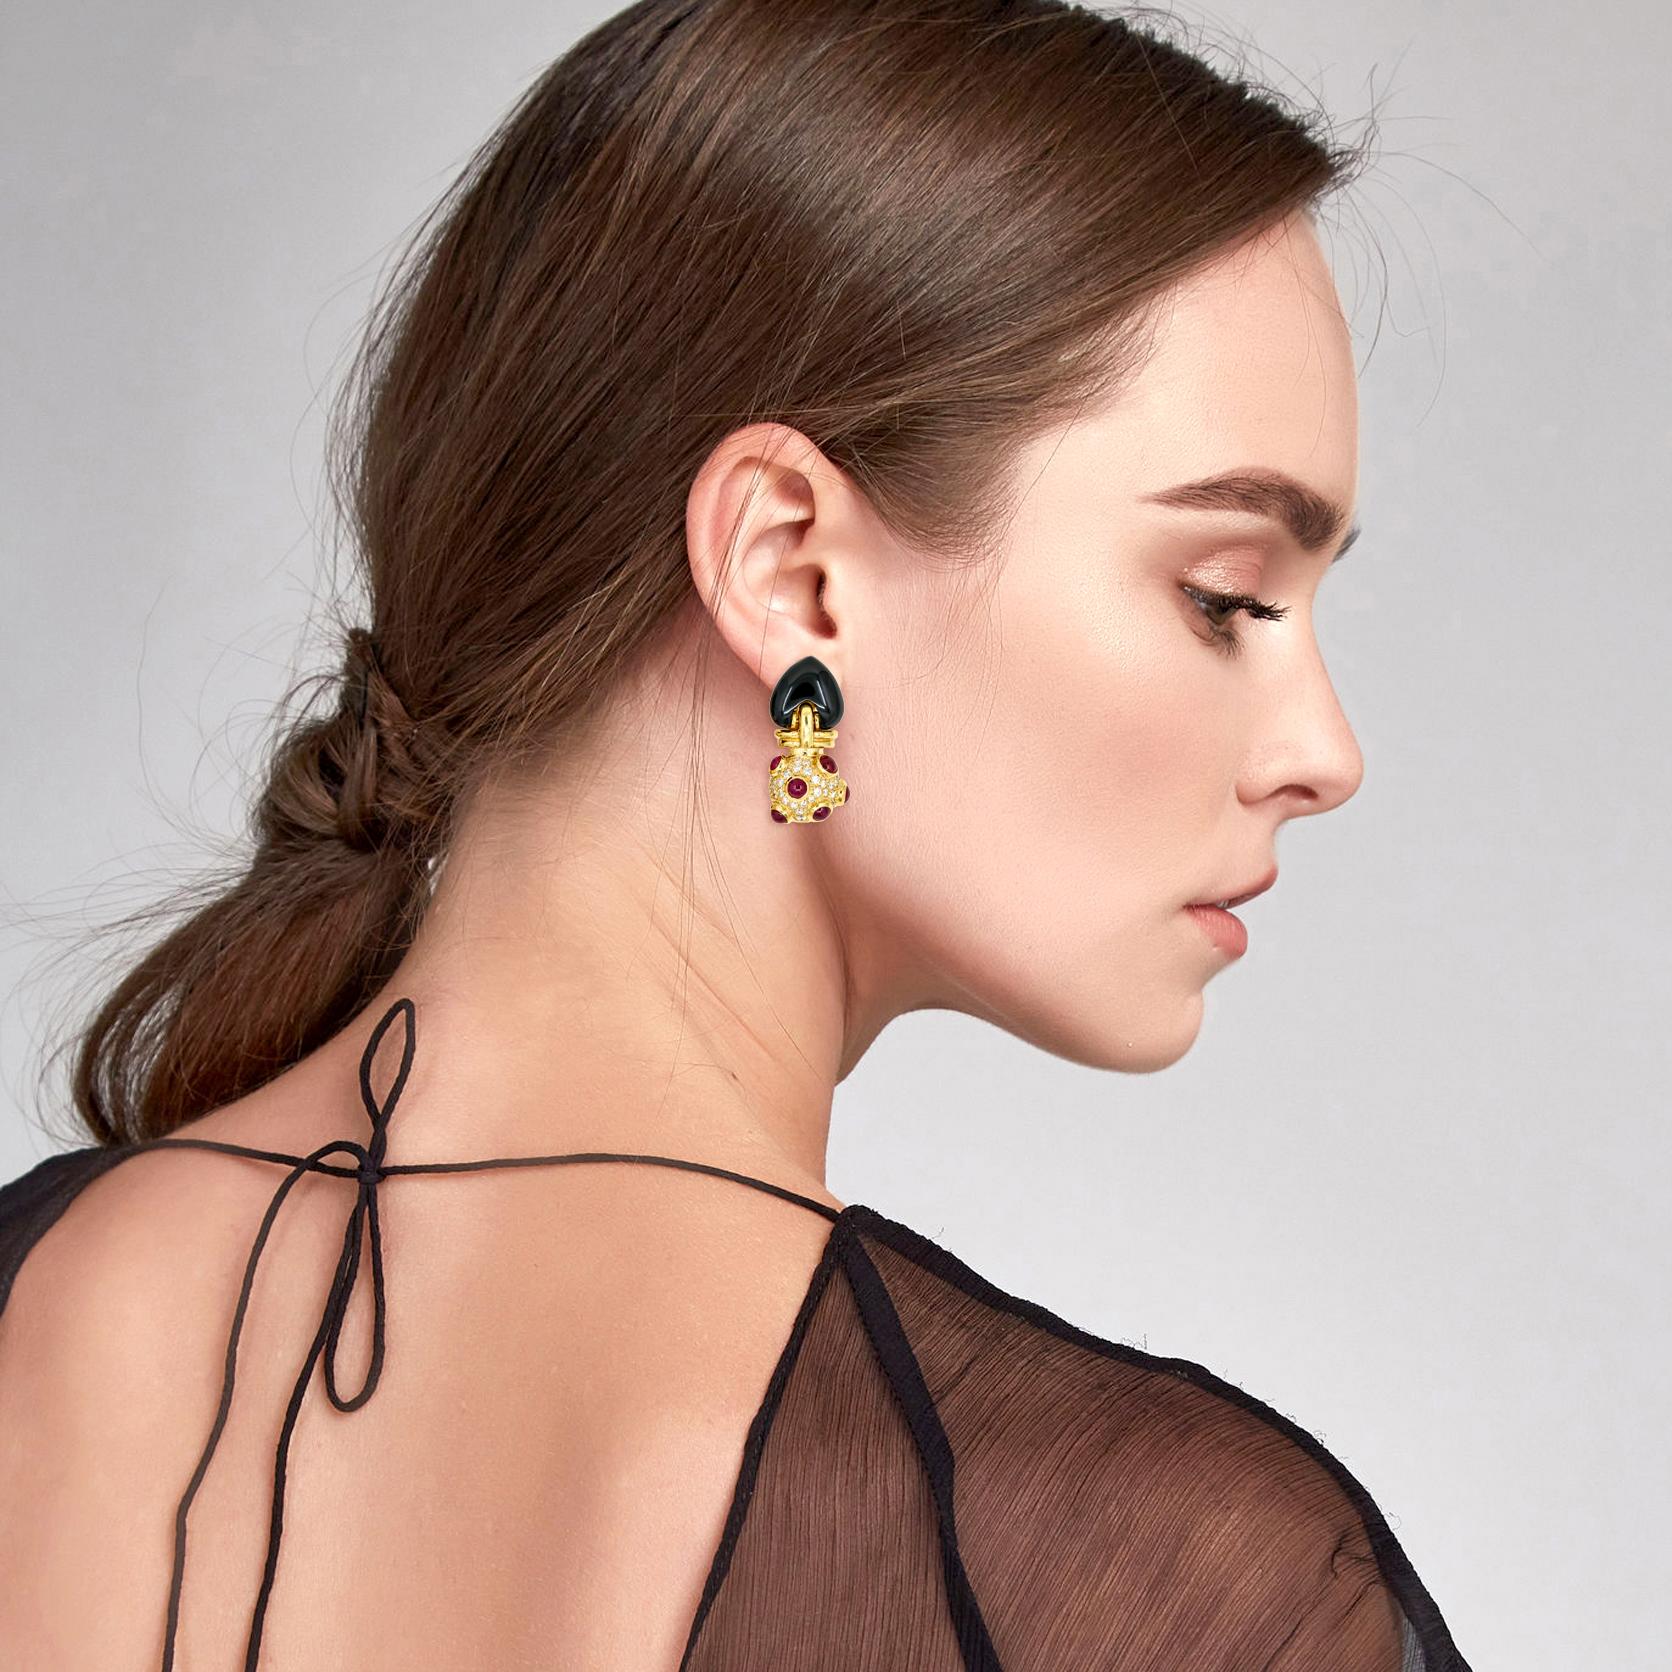 Onyx, Ruby and Diamond drop earrings in 18-karat yellow gold. Each earring has a large custom cut black onyx, bezel set with 6 cabochon natural rubies, and prong set with numerous near colorless brilliant round diamonds. Omega backs. Diamond color